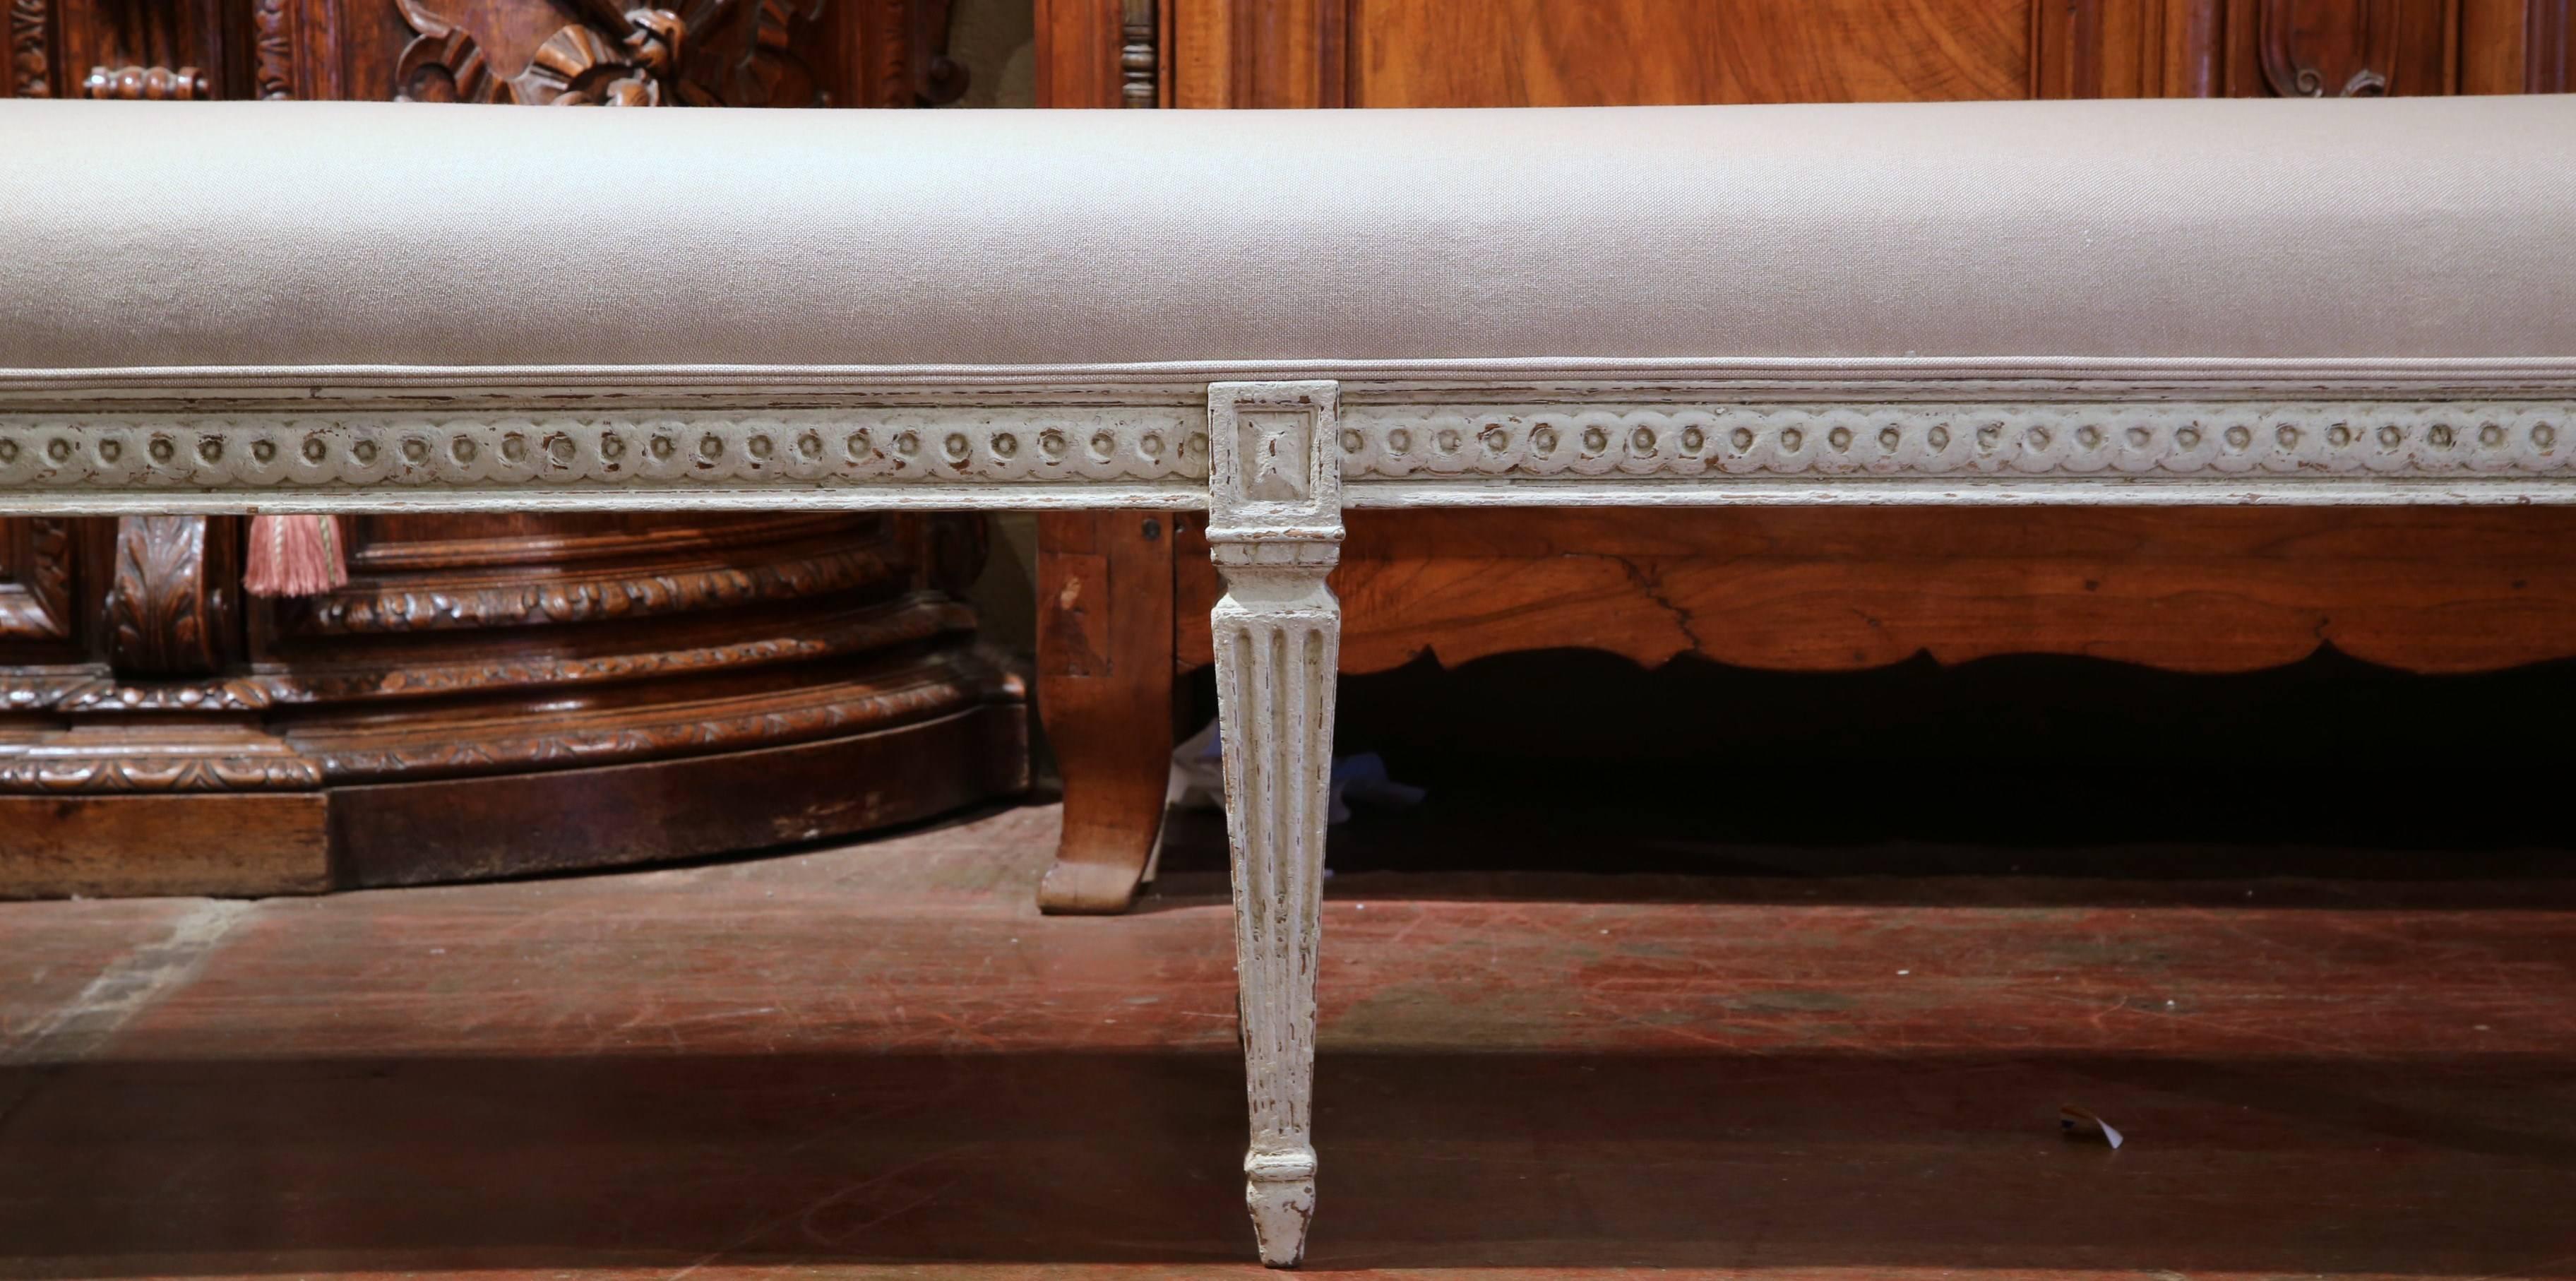 Pair of fine antique Louis 16 benches from France, circa 1880. With six tapered legs with carvings around the apron and reupholstered with thick grey toile, these benches are the perfect sizes at the end of a king-size bed!